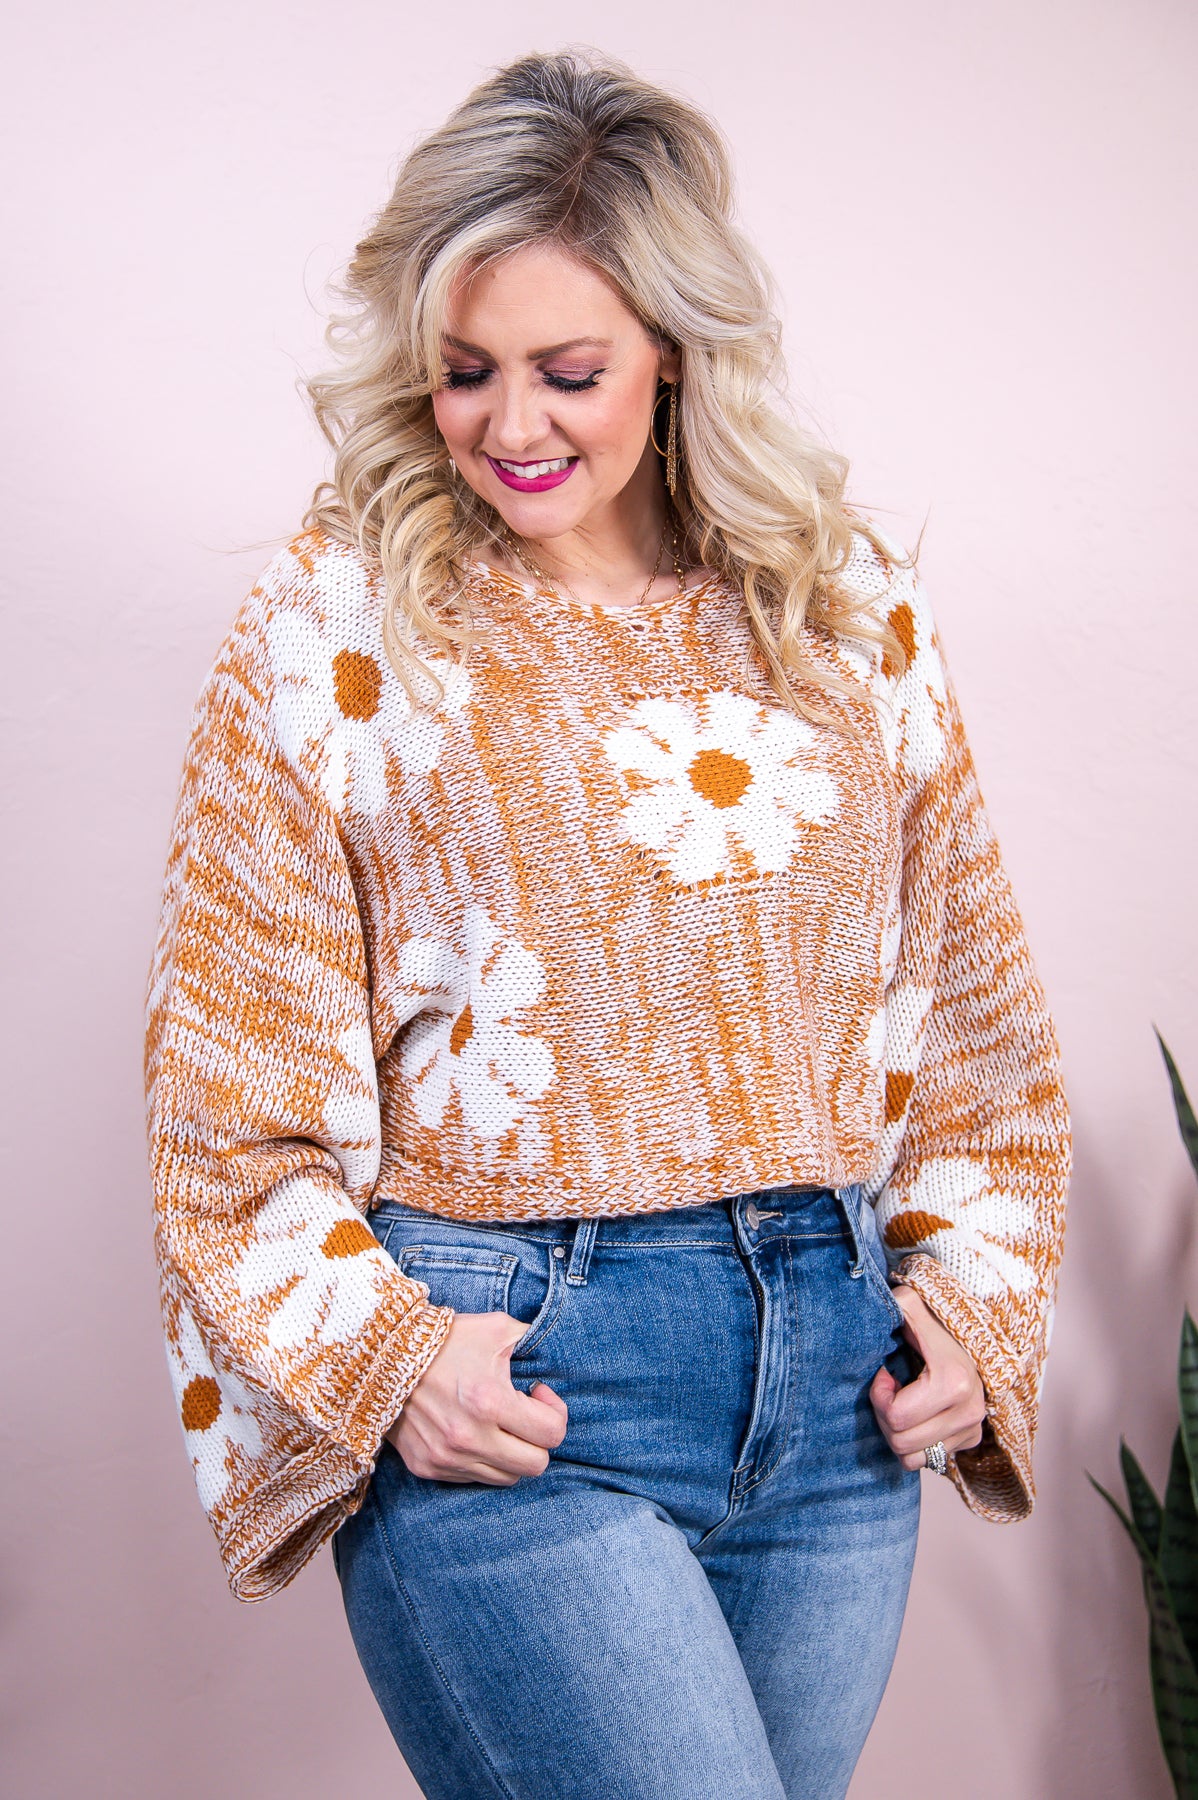 Sincerely Snuggly Camel/Ivory Floral Cropped Sweater Top - T8738CA